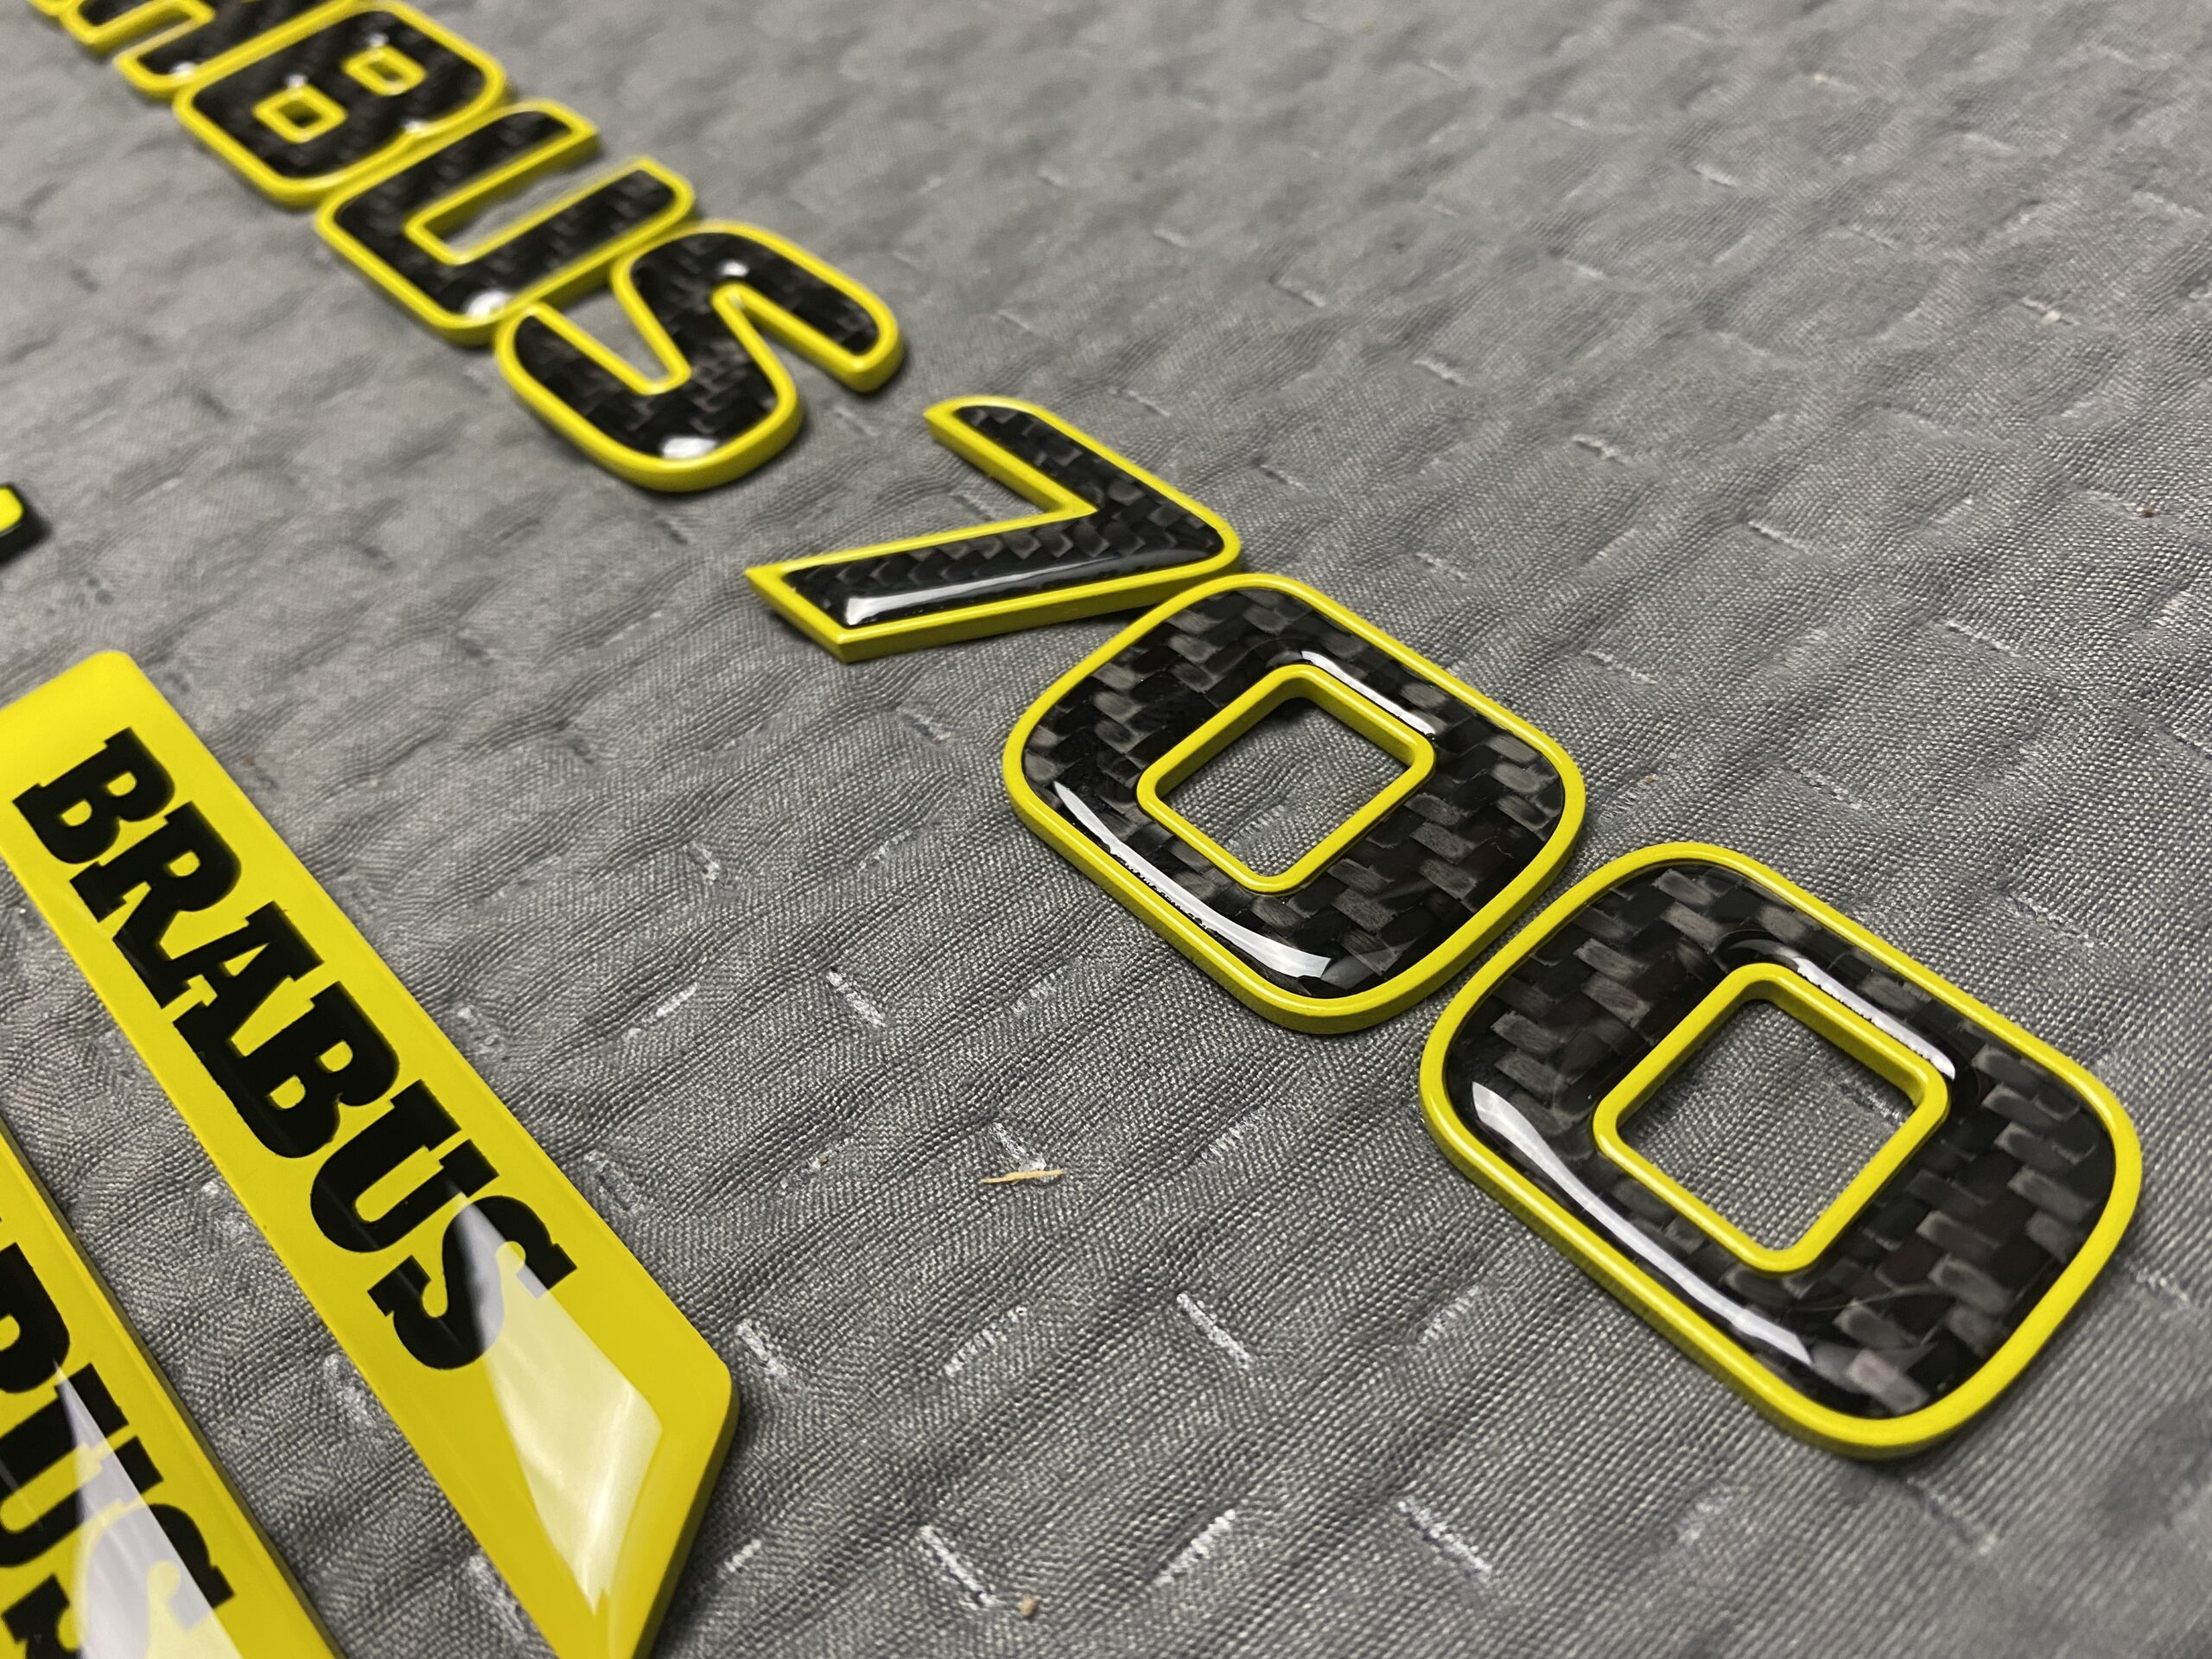 Emblem Brabus 700 Set Rocket style yellow and сarbon for Mercedes Benz G  Class